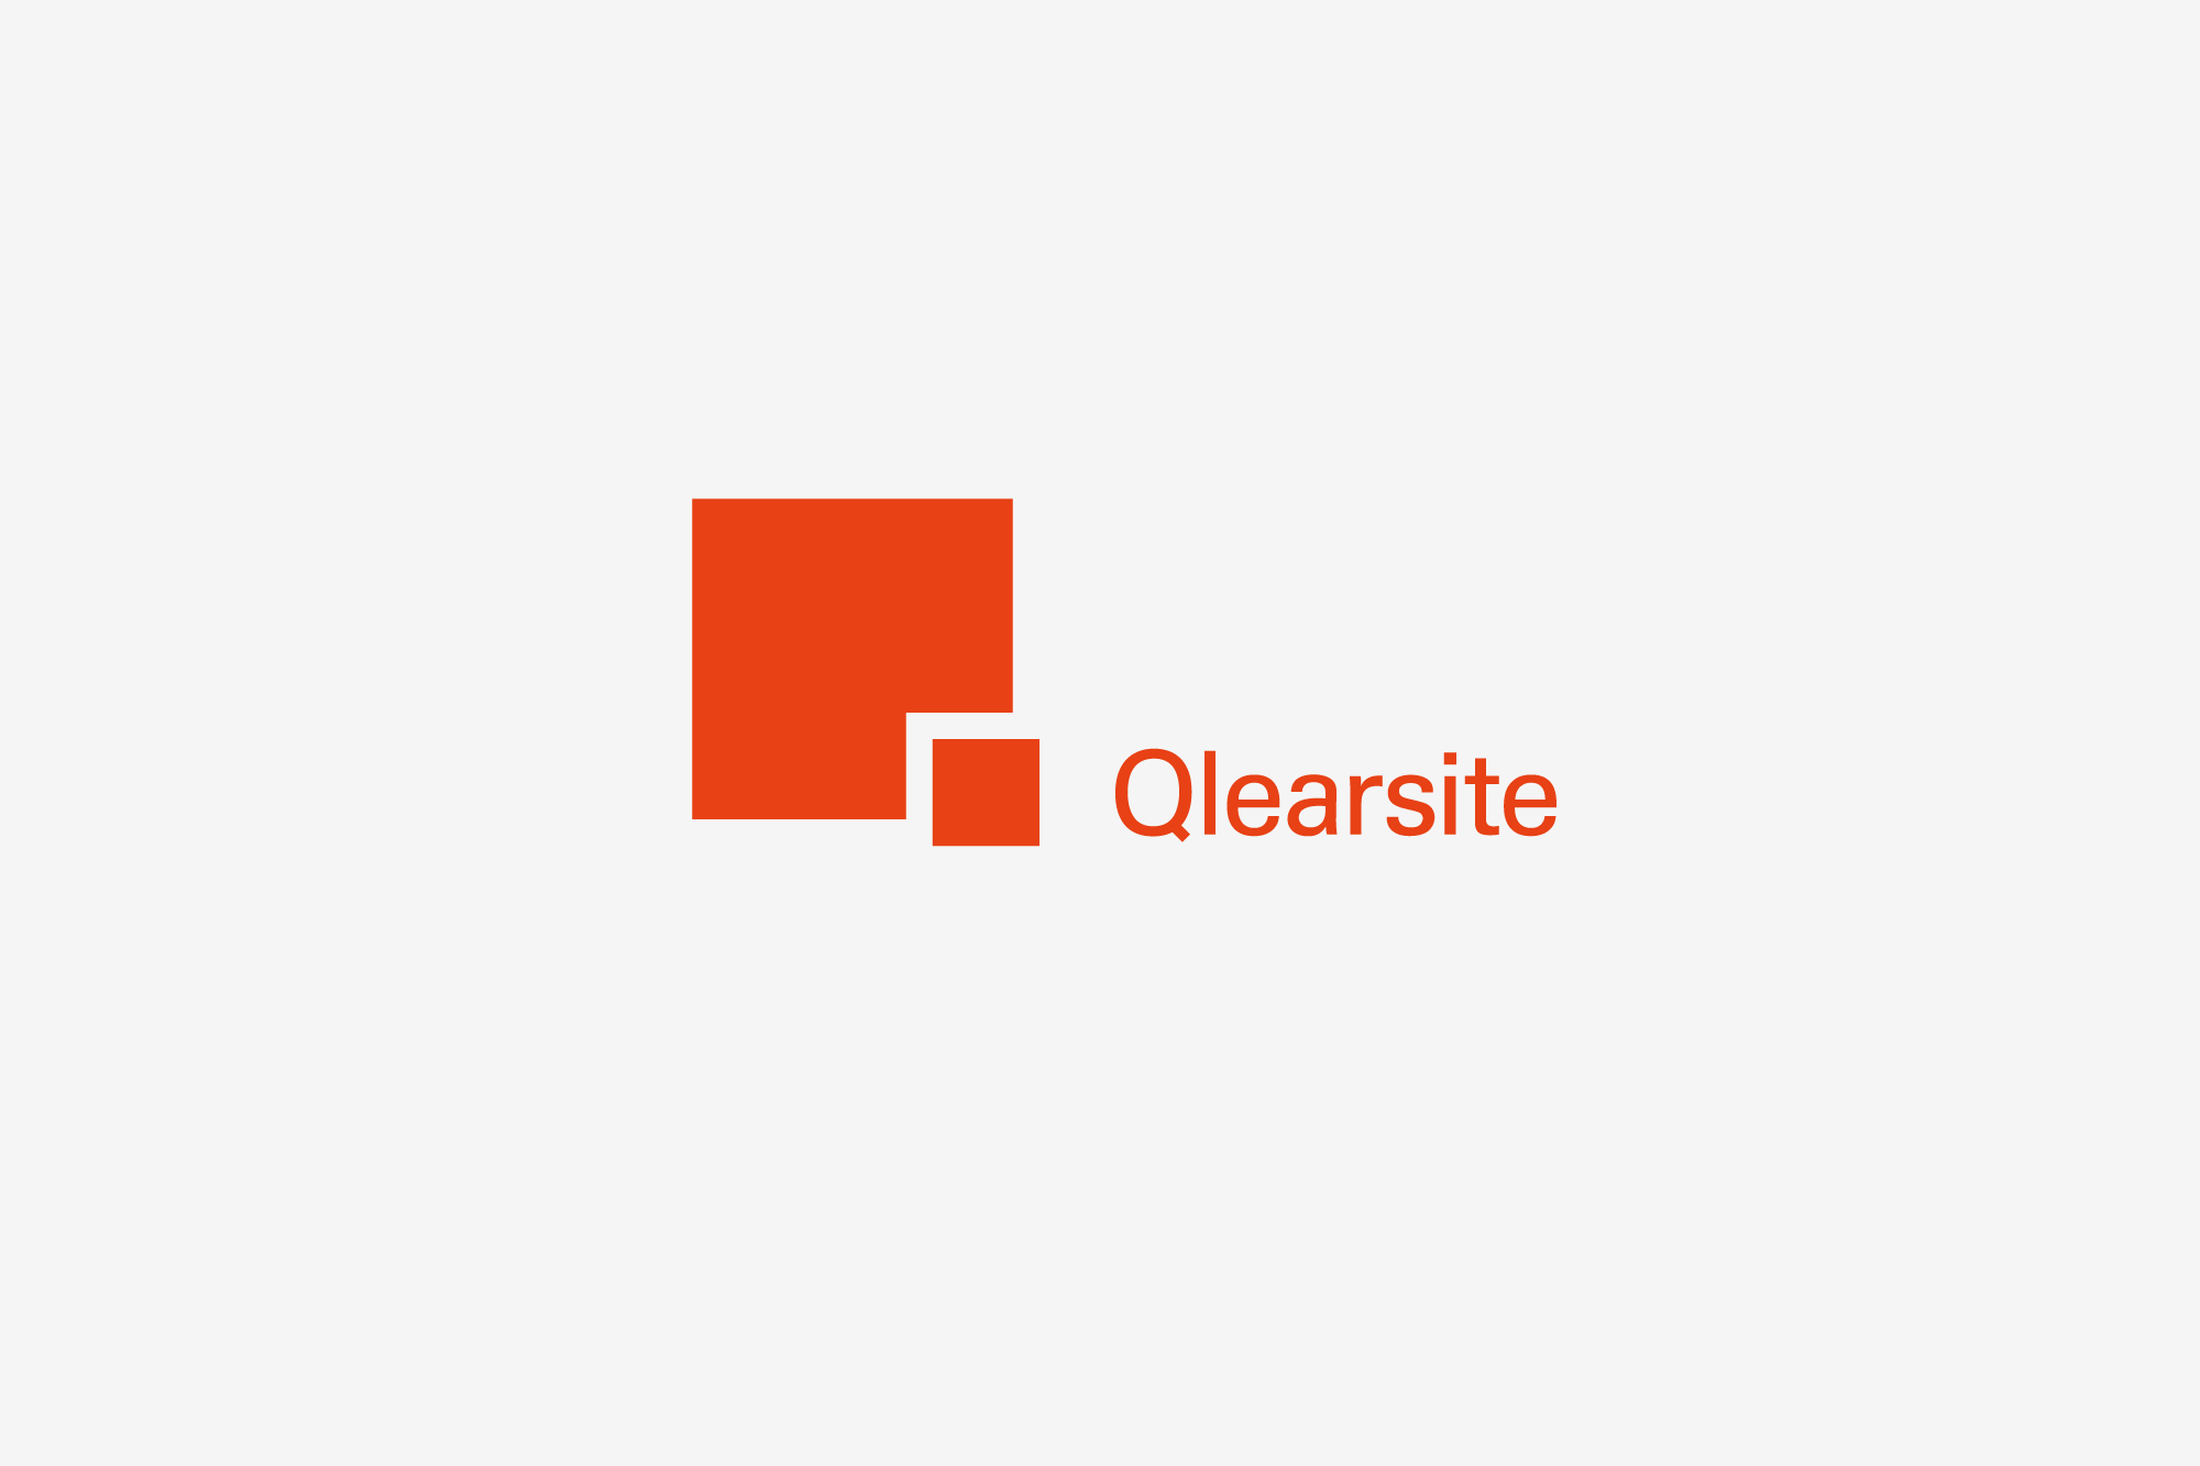 2_qlearsite_logotype.png